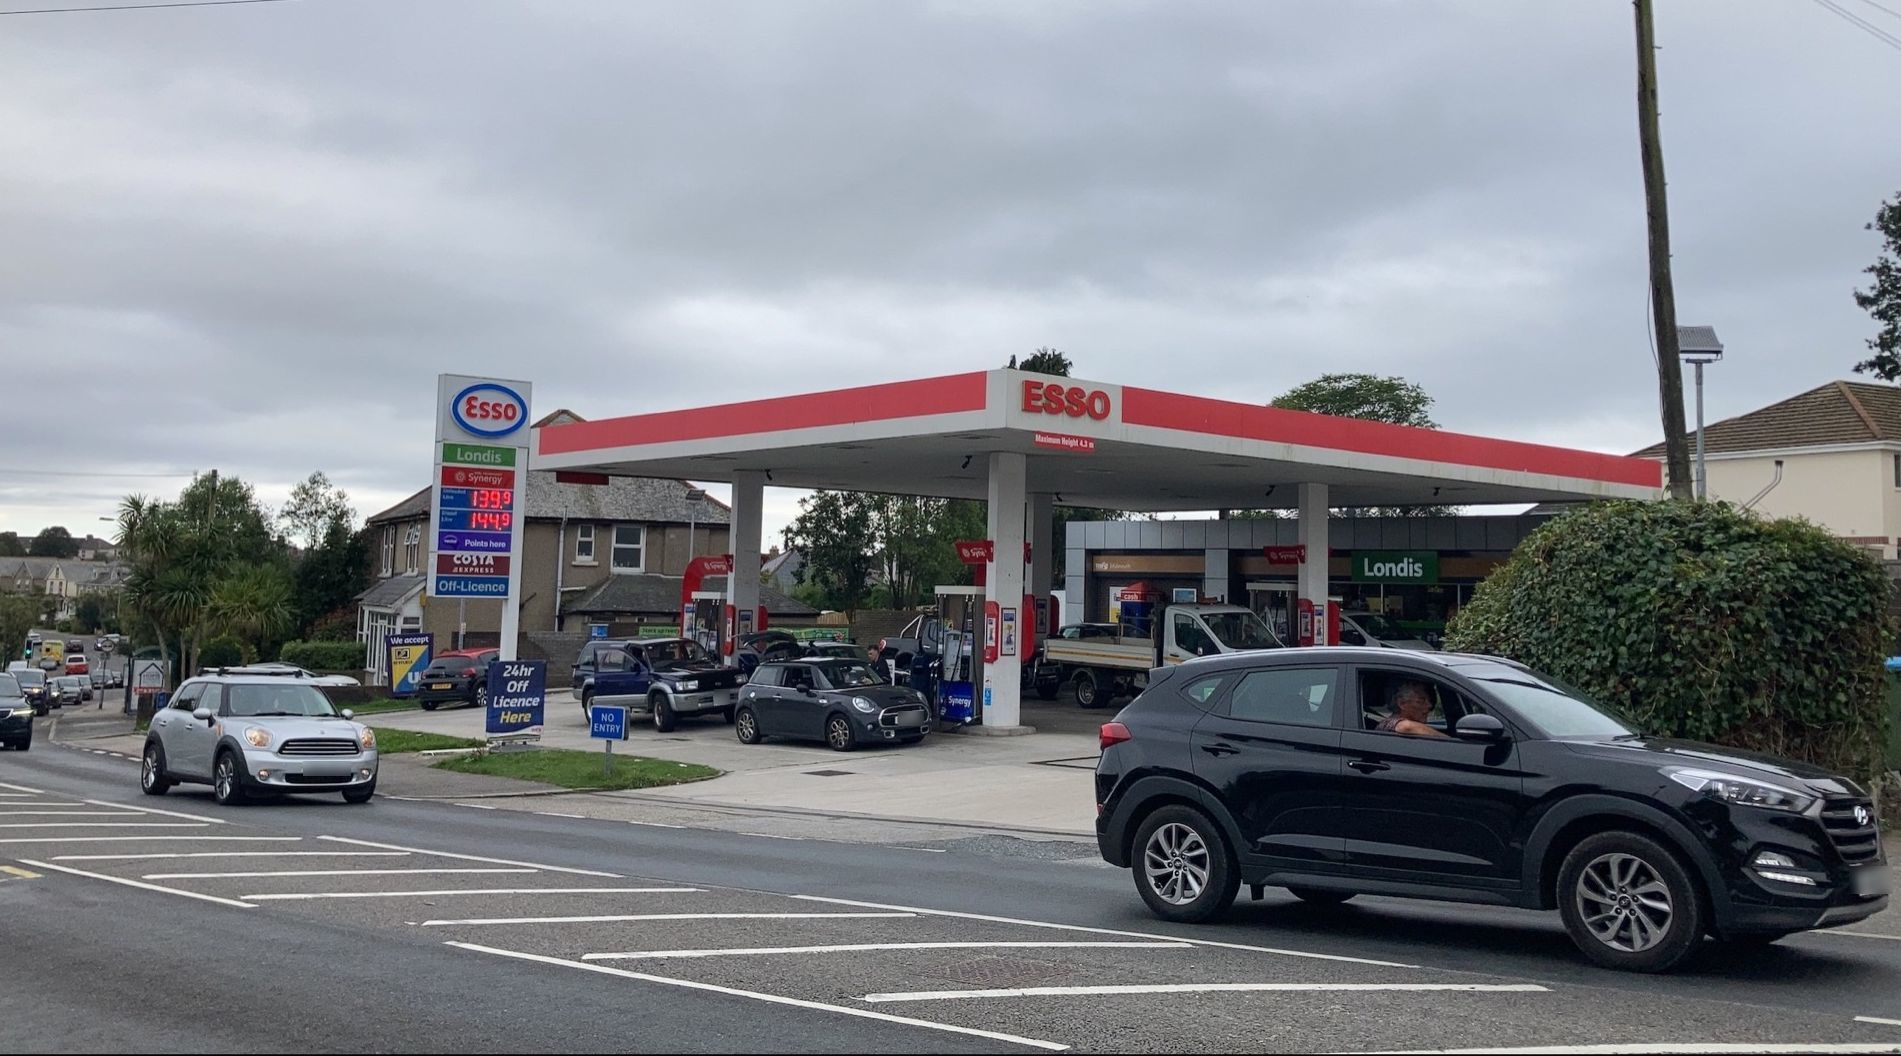 Its business as usual at the Falmouth Esso fuel station